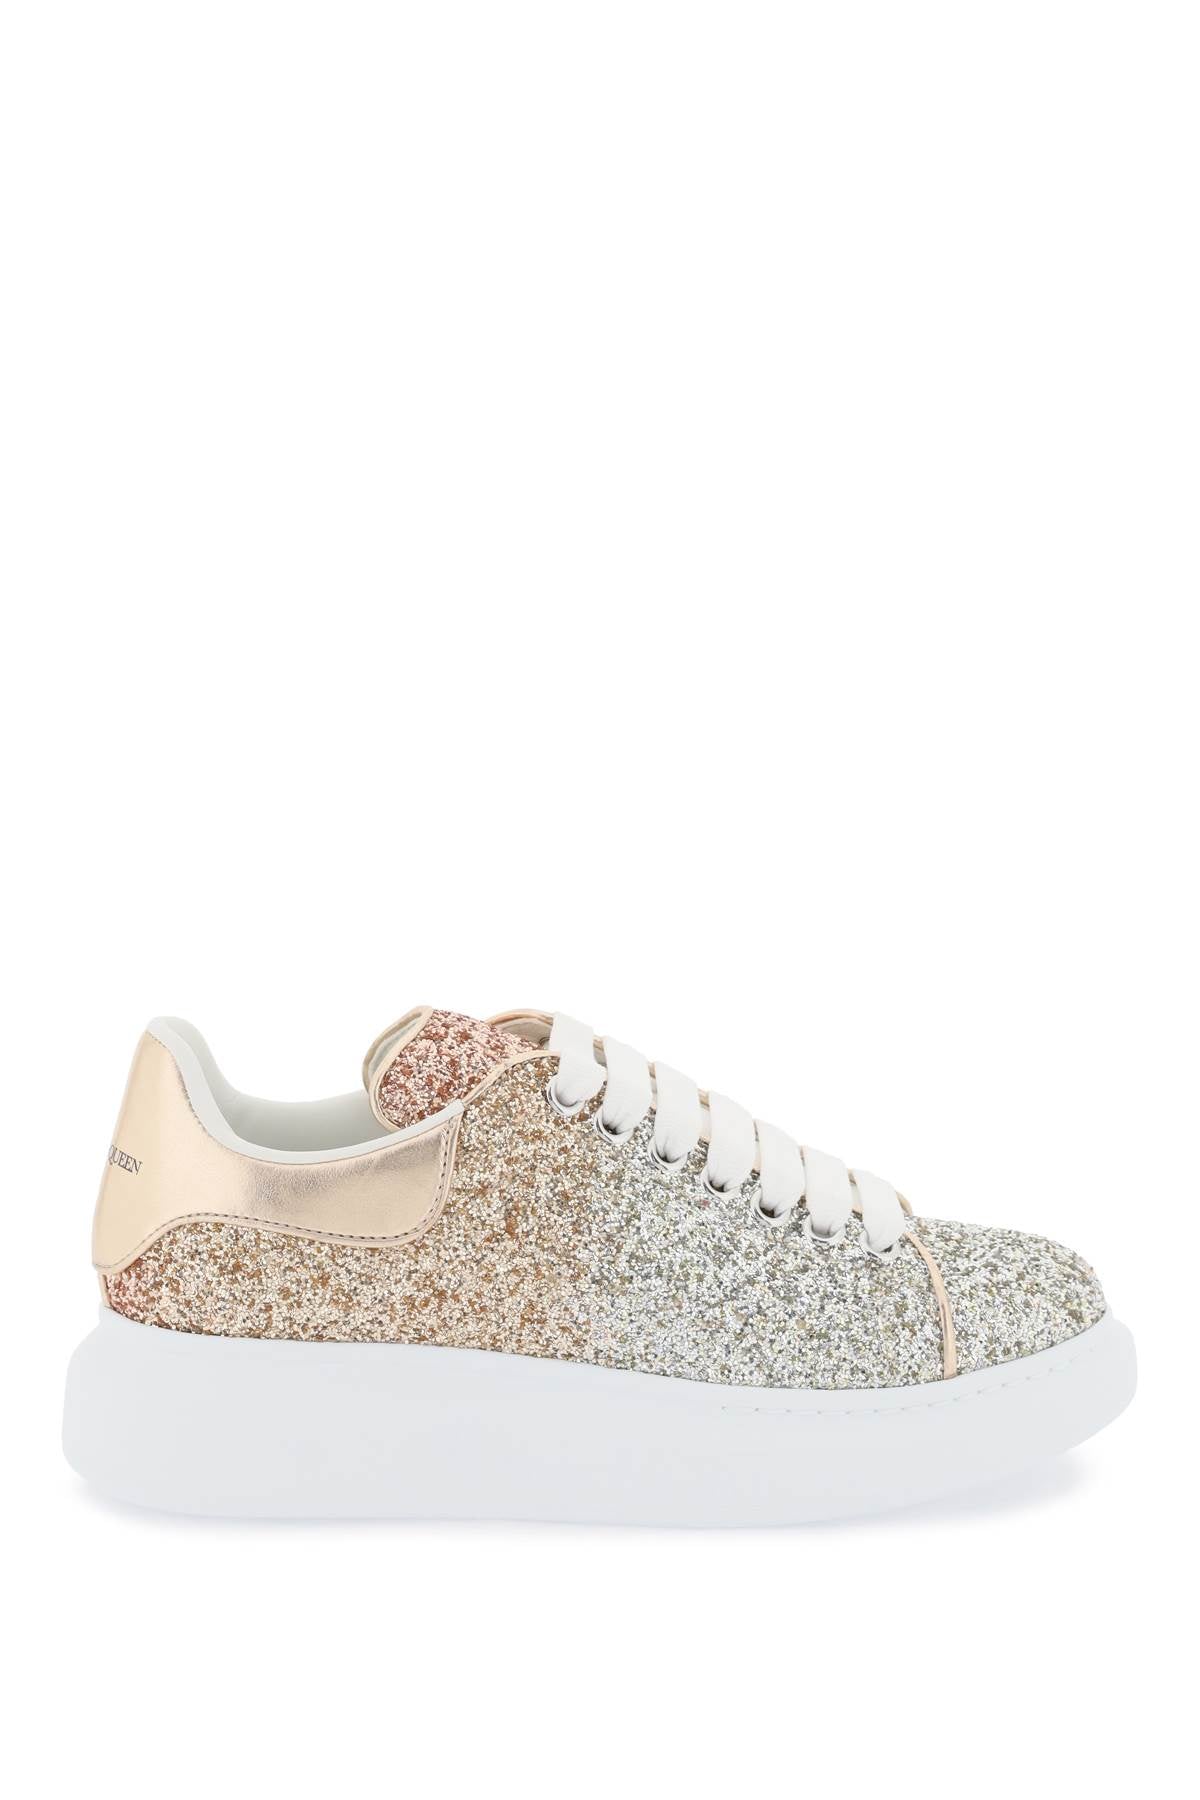 Alexander mcqueen 'oversize' sneakers with glitter 755624 W4WR1 ROSE GLOD TAUPE